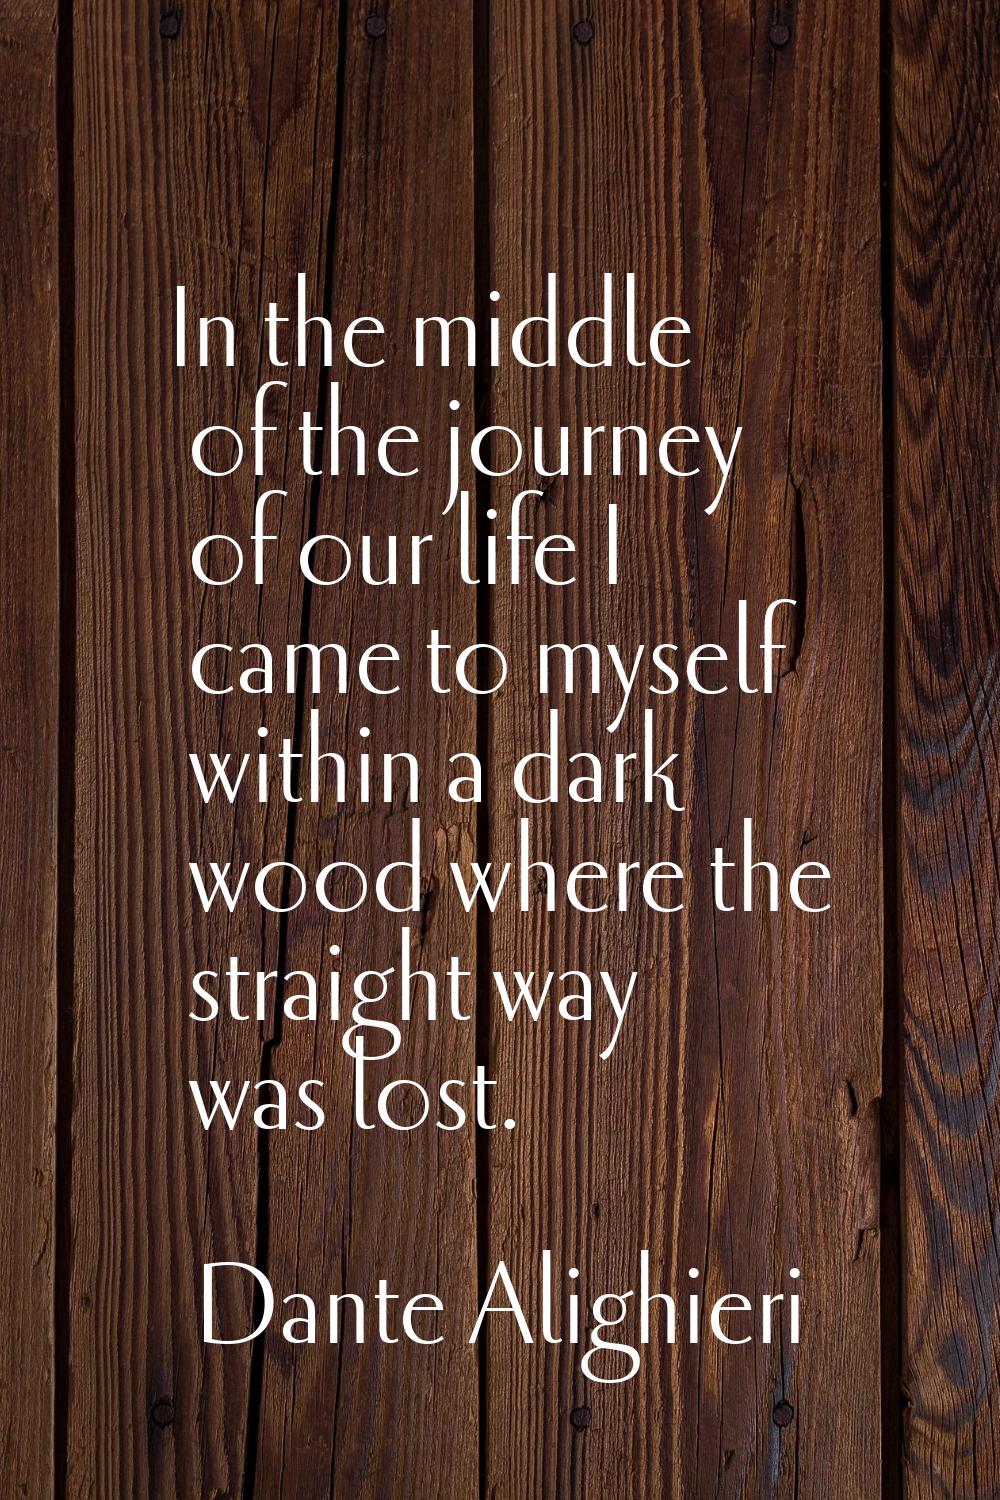 In the middle of the journey of our life I came to myself within a dark wood where the straight way